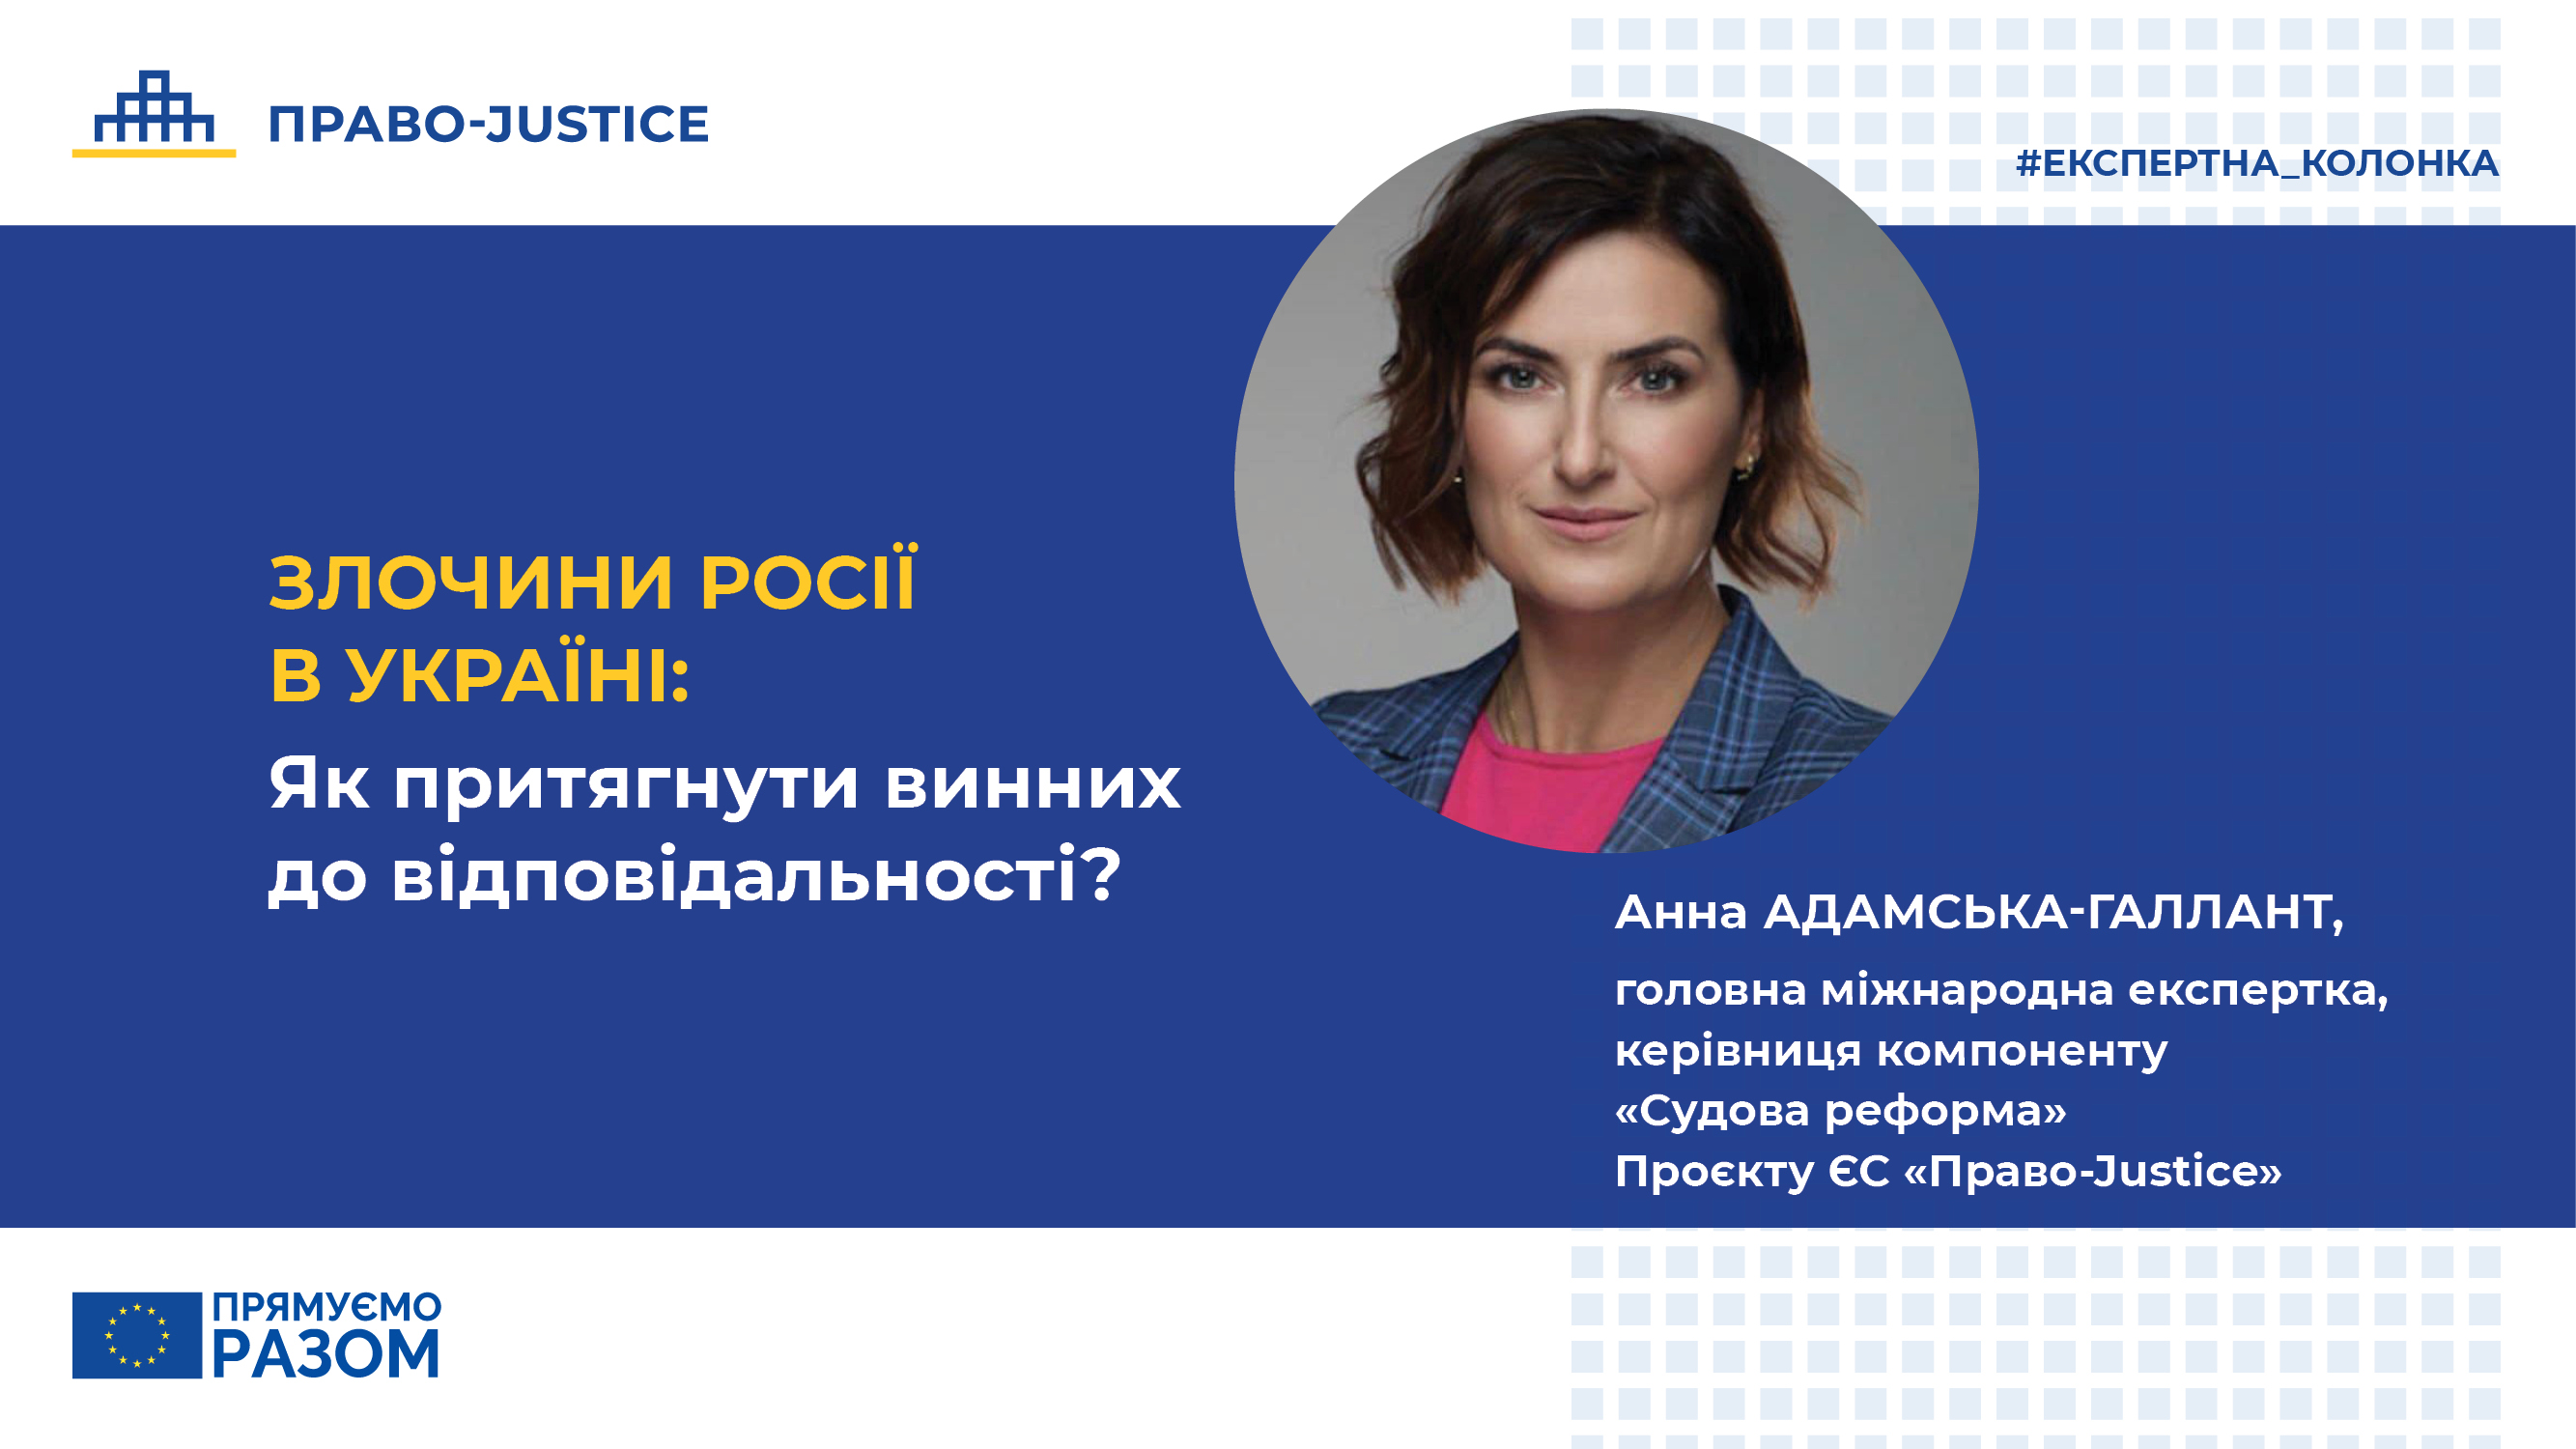 Russia’s Crimes in Ukraine: How to Bring the Culprits to Justice? Blog by Anna Adamska-Gallant for NV.ua